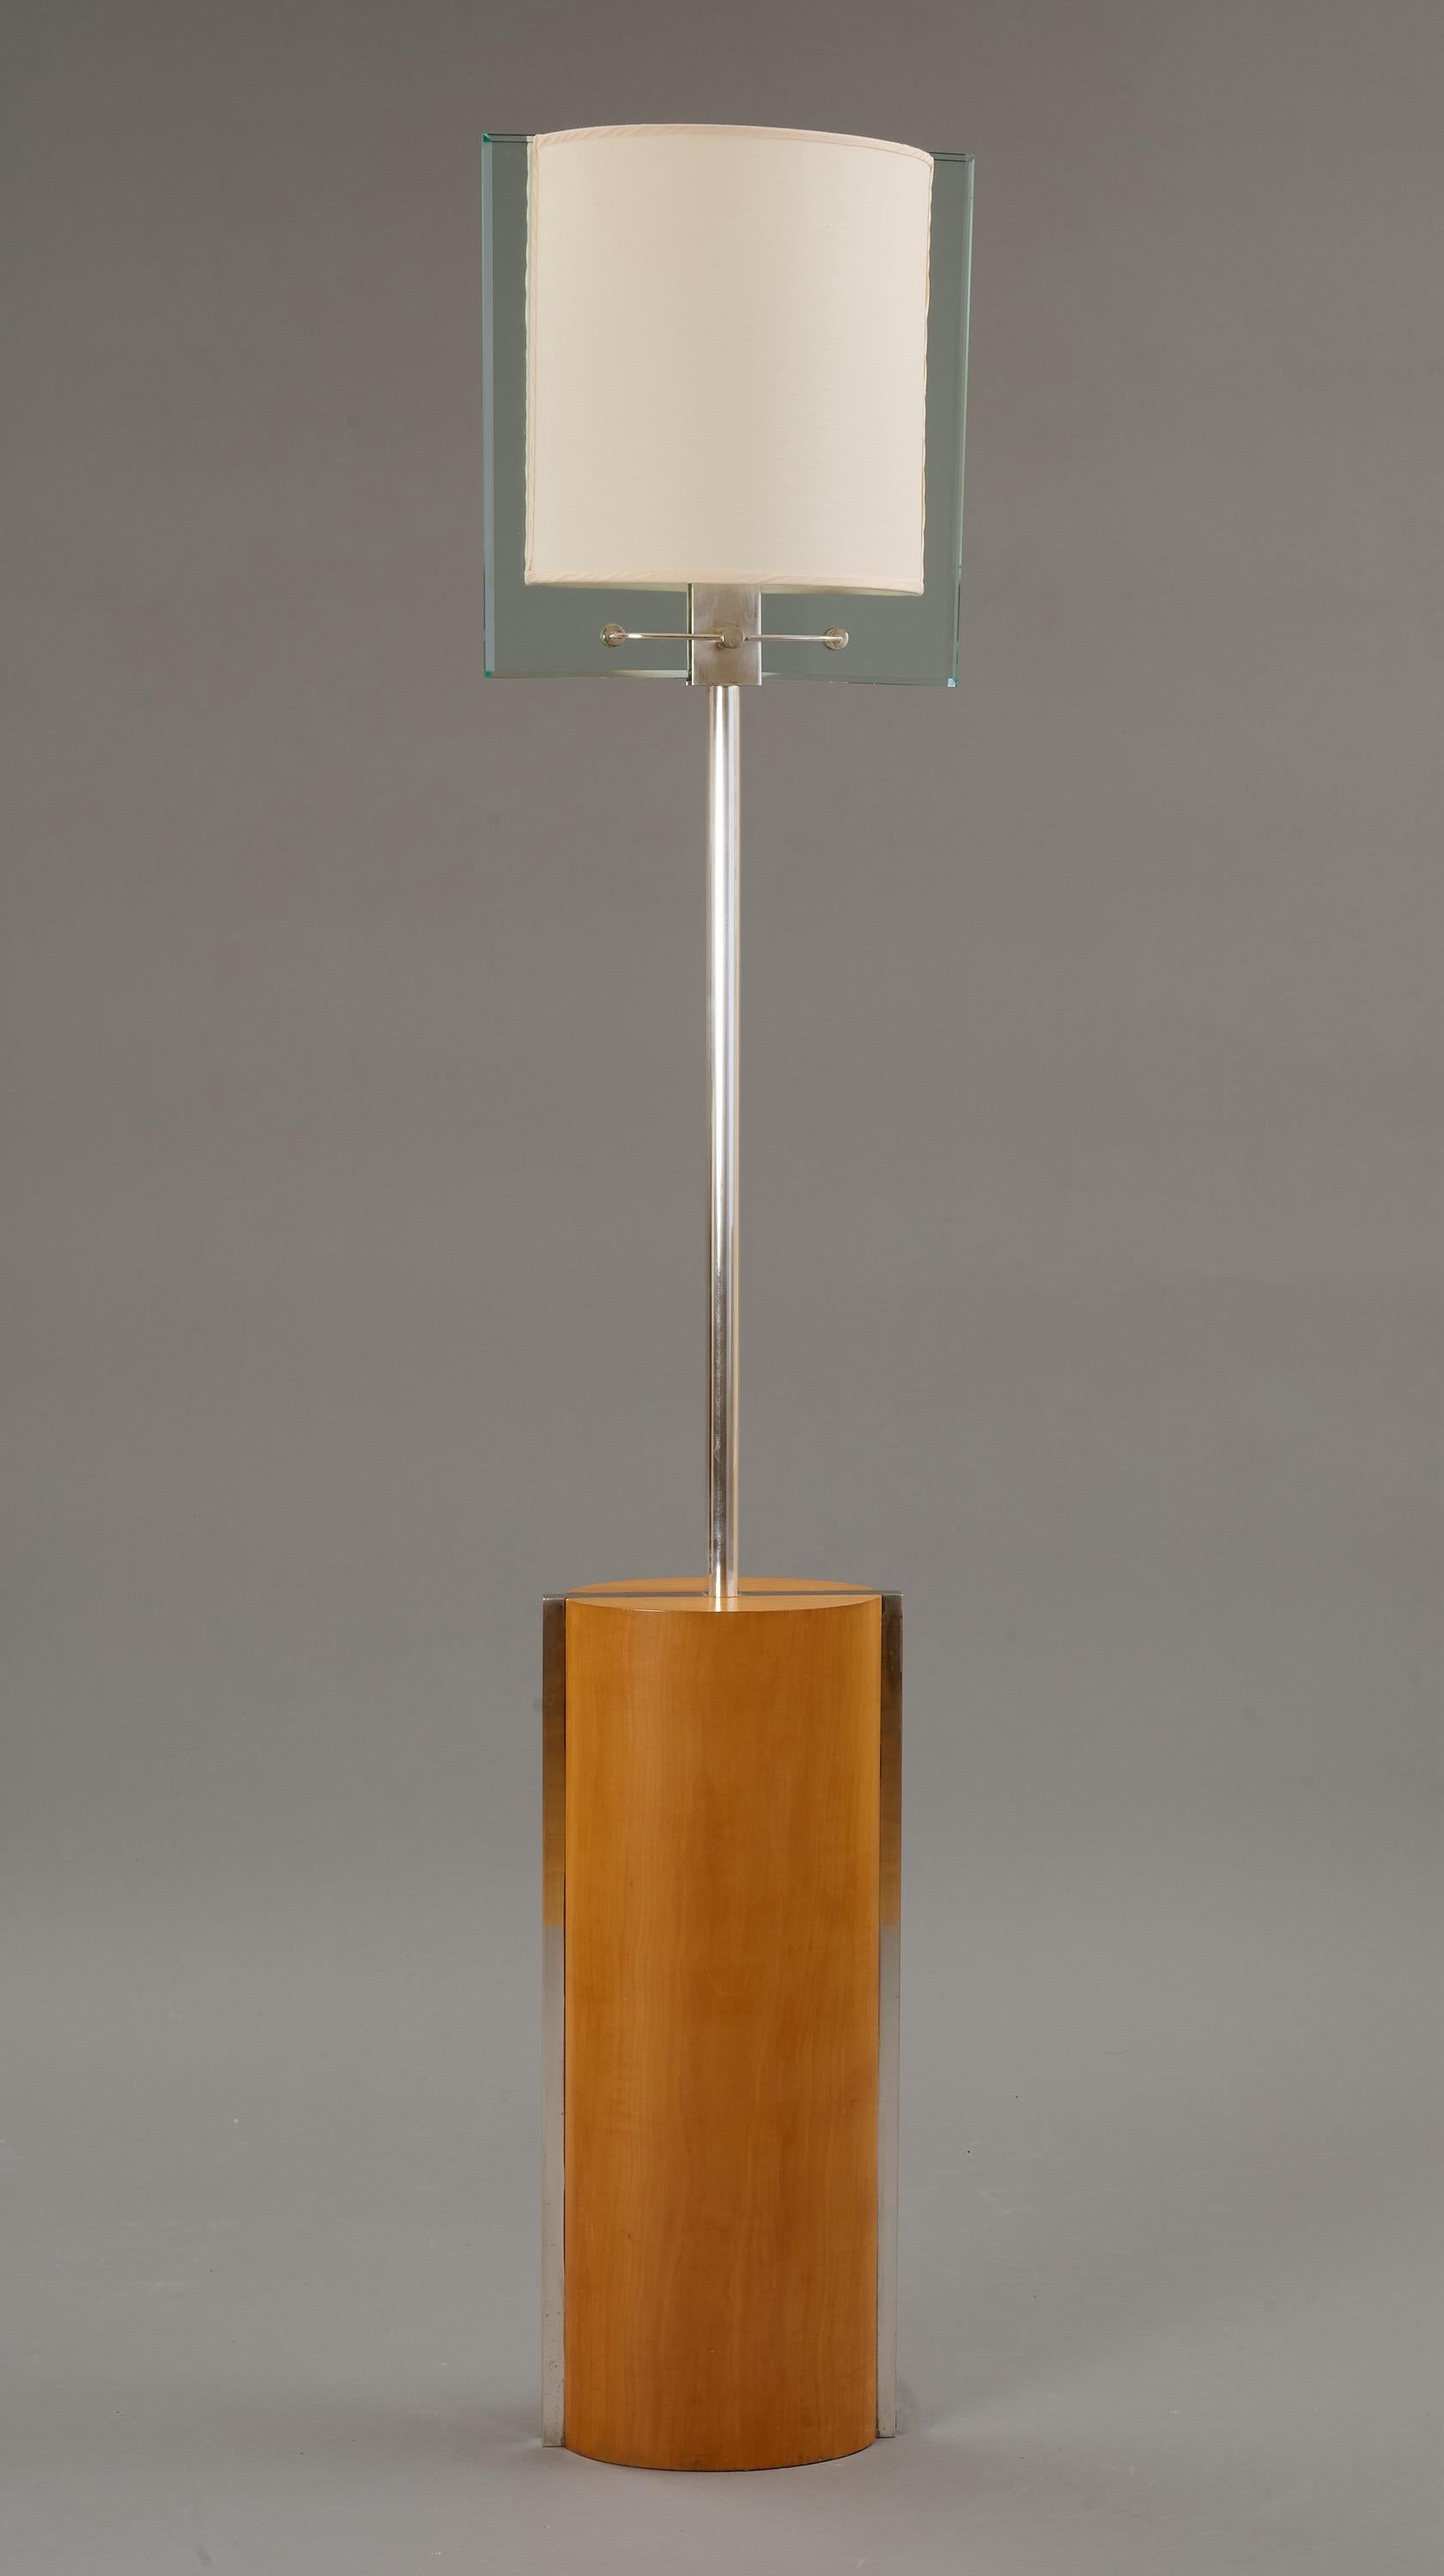 Nathalie Grenon (b. 1954) for Fontana Arte 

A pure and elegant modernist floor lamp designed by French architect Nathalie Grenon for Fontana Arte. A stunning rectangular frame in remarkable thick glass cradles a rounded silk shade, supported by